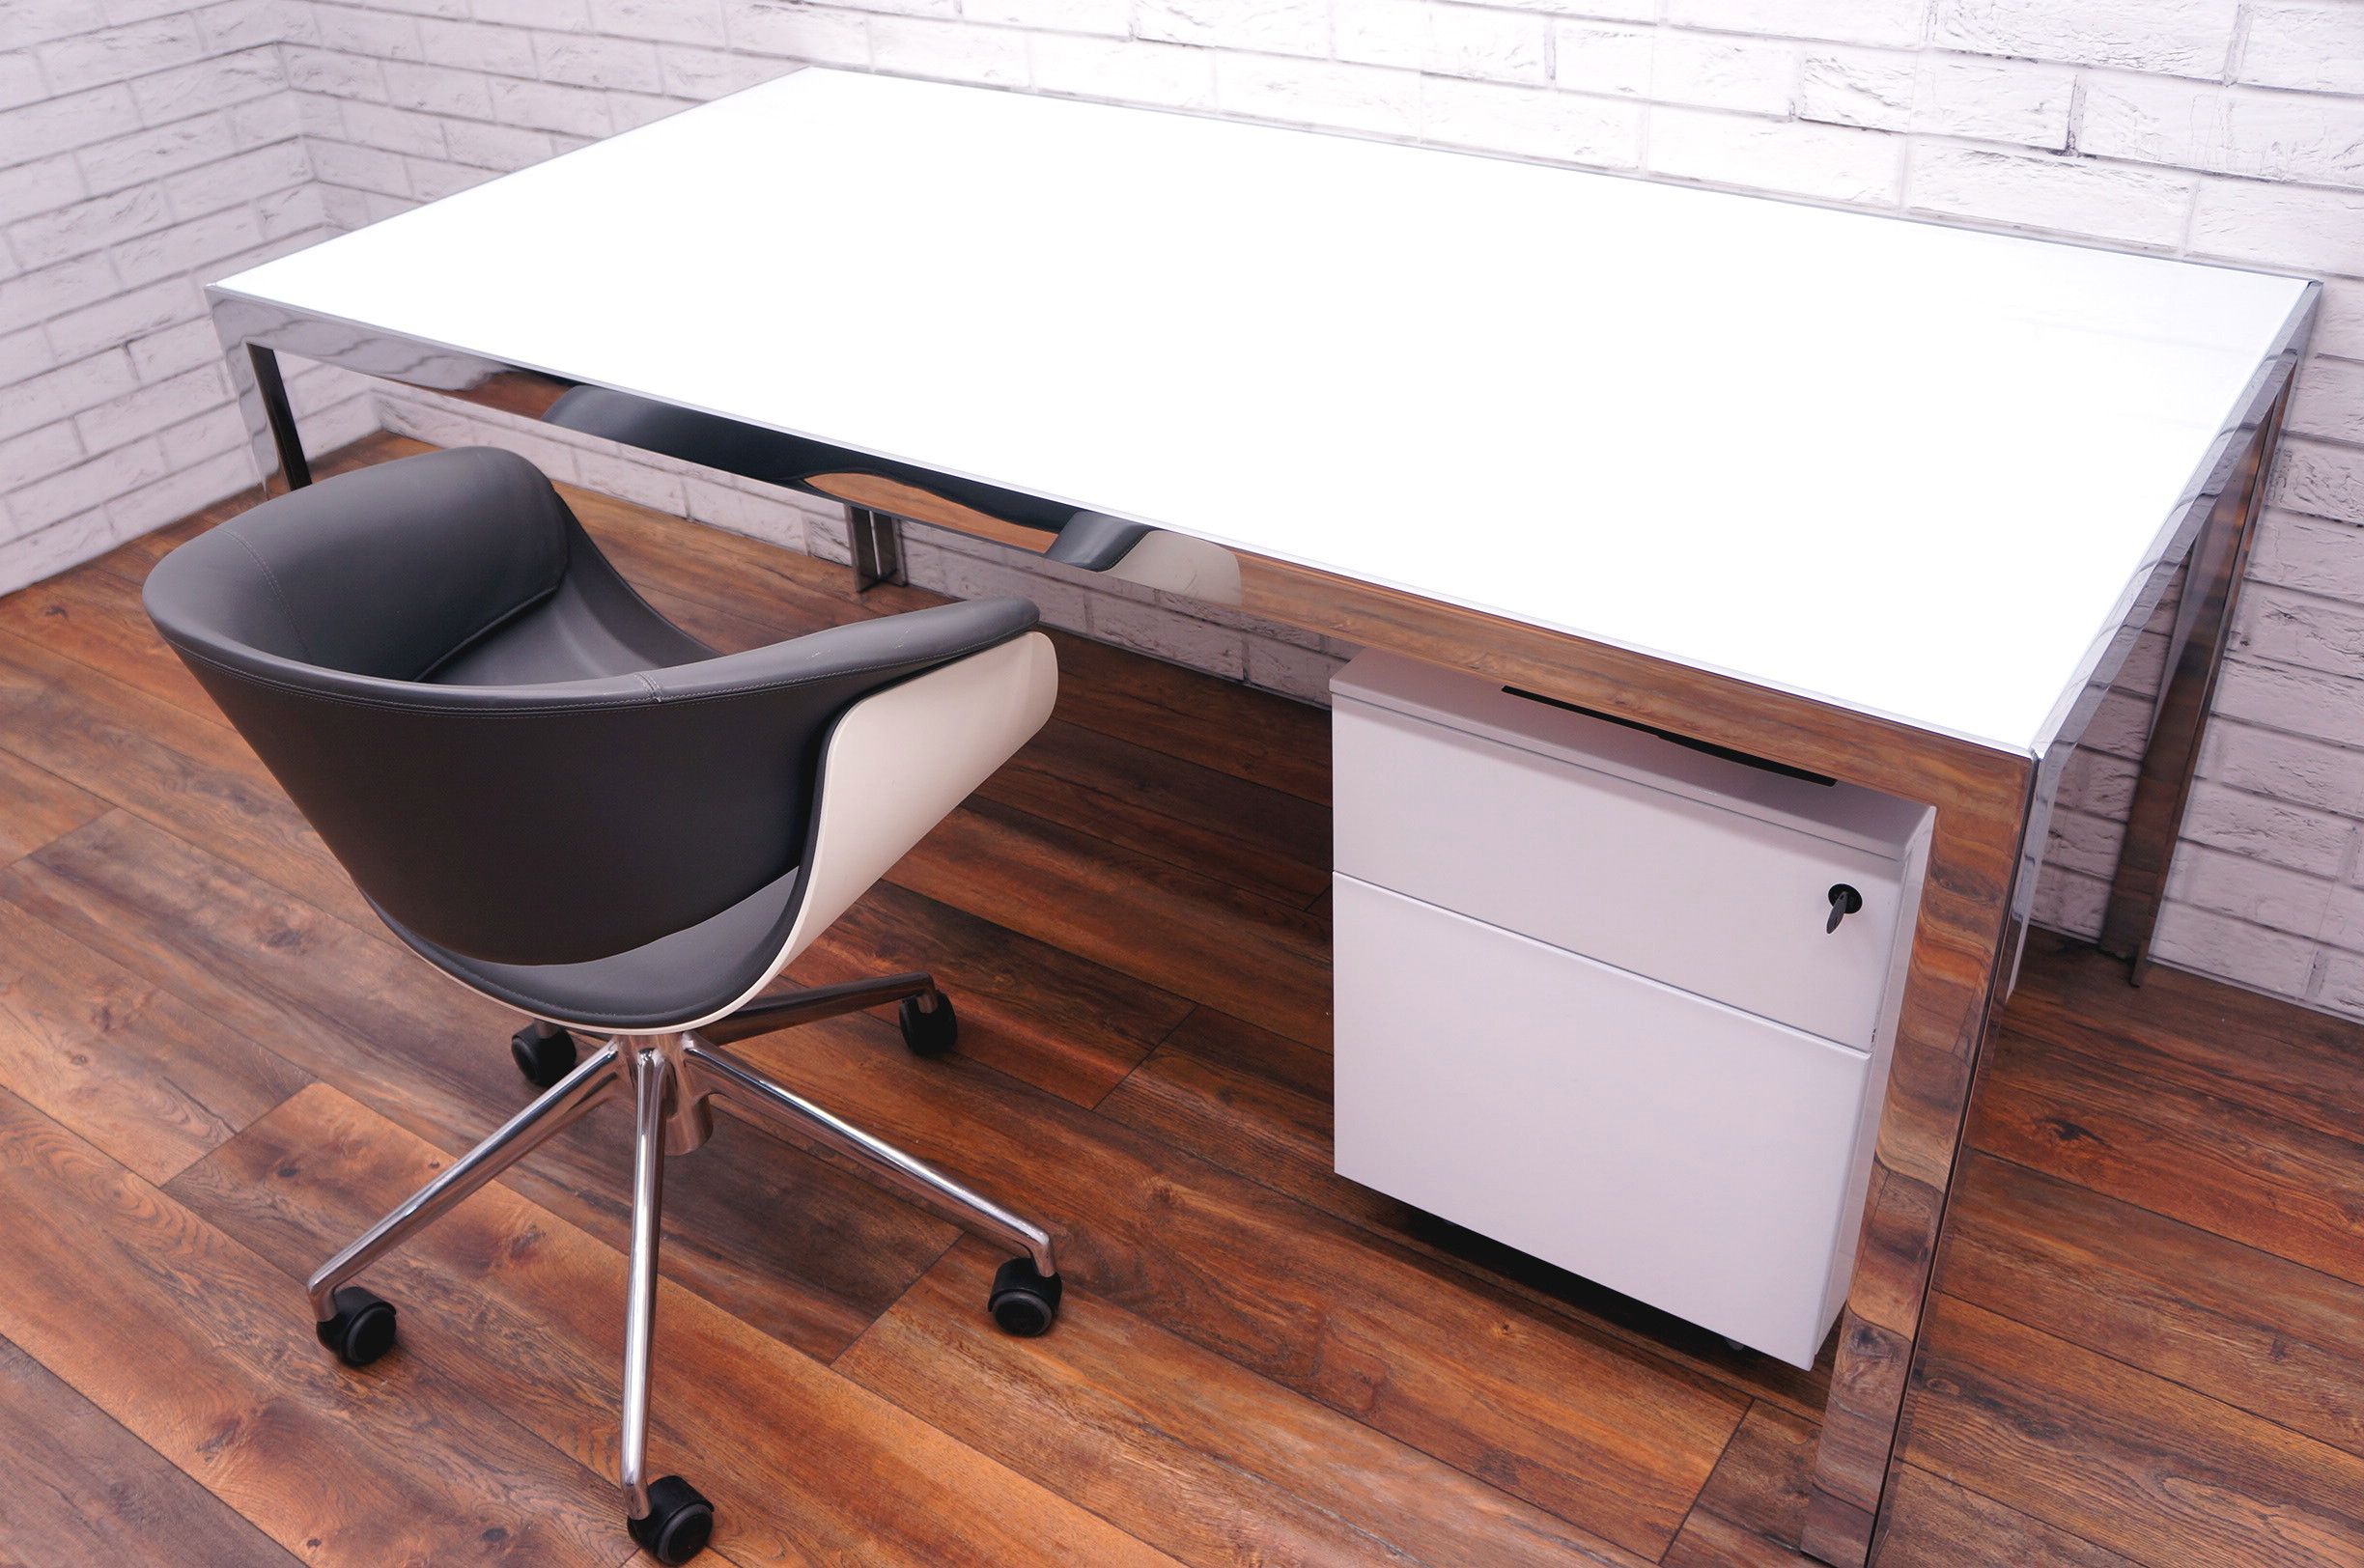 B&b Italia Progetto 1 White Glass Top Desk – Office Resale Pertaining To White Glass And Natural Wood Office Desks (View 13 of 15)